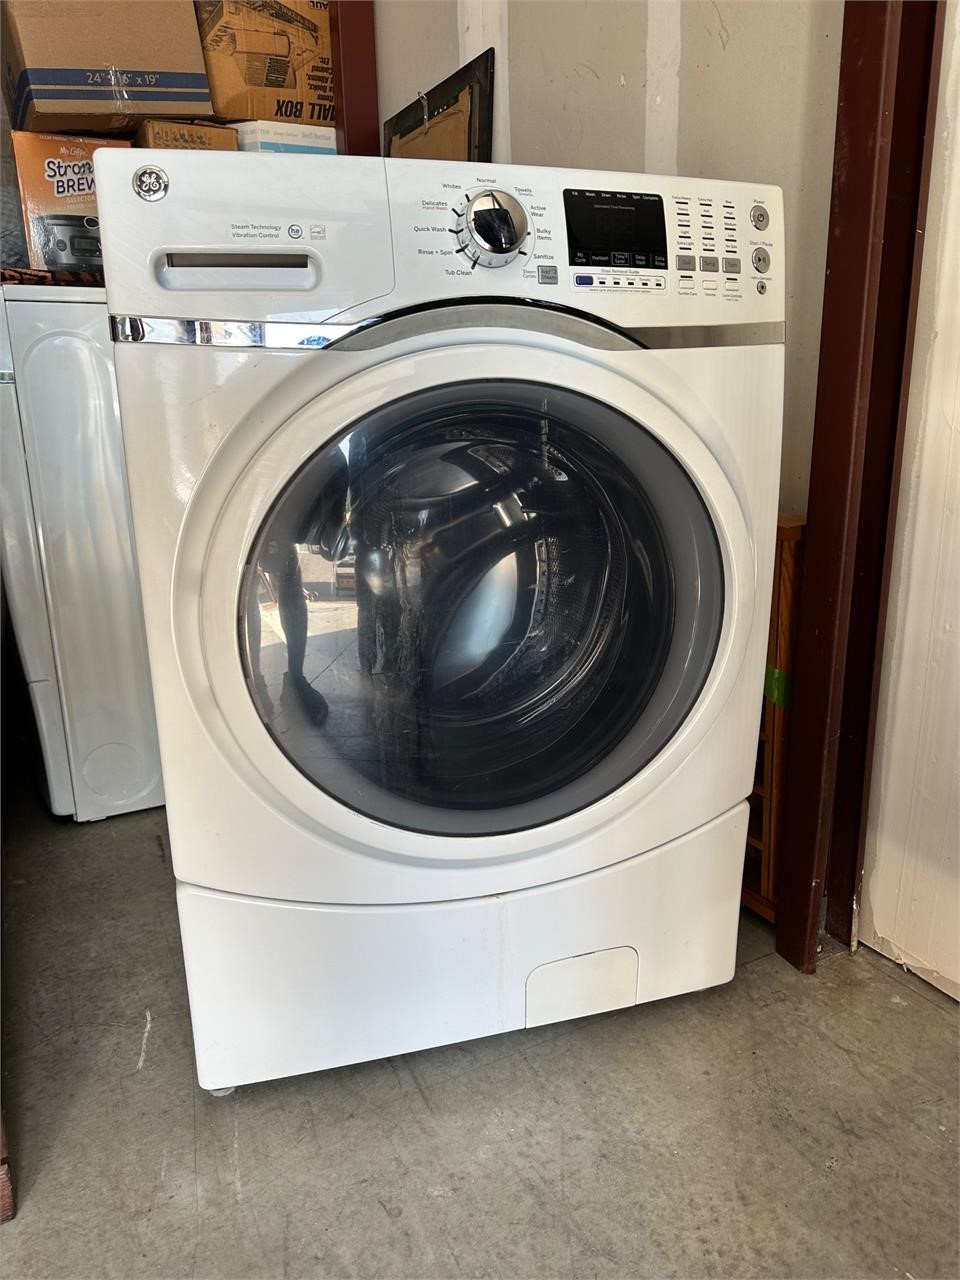 Great Value - GE 4.5 cu. ft. Front Load Washer